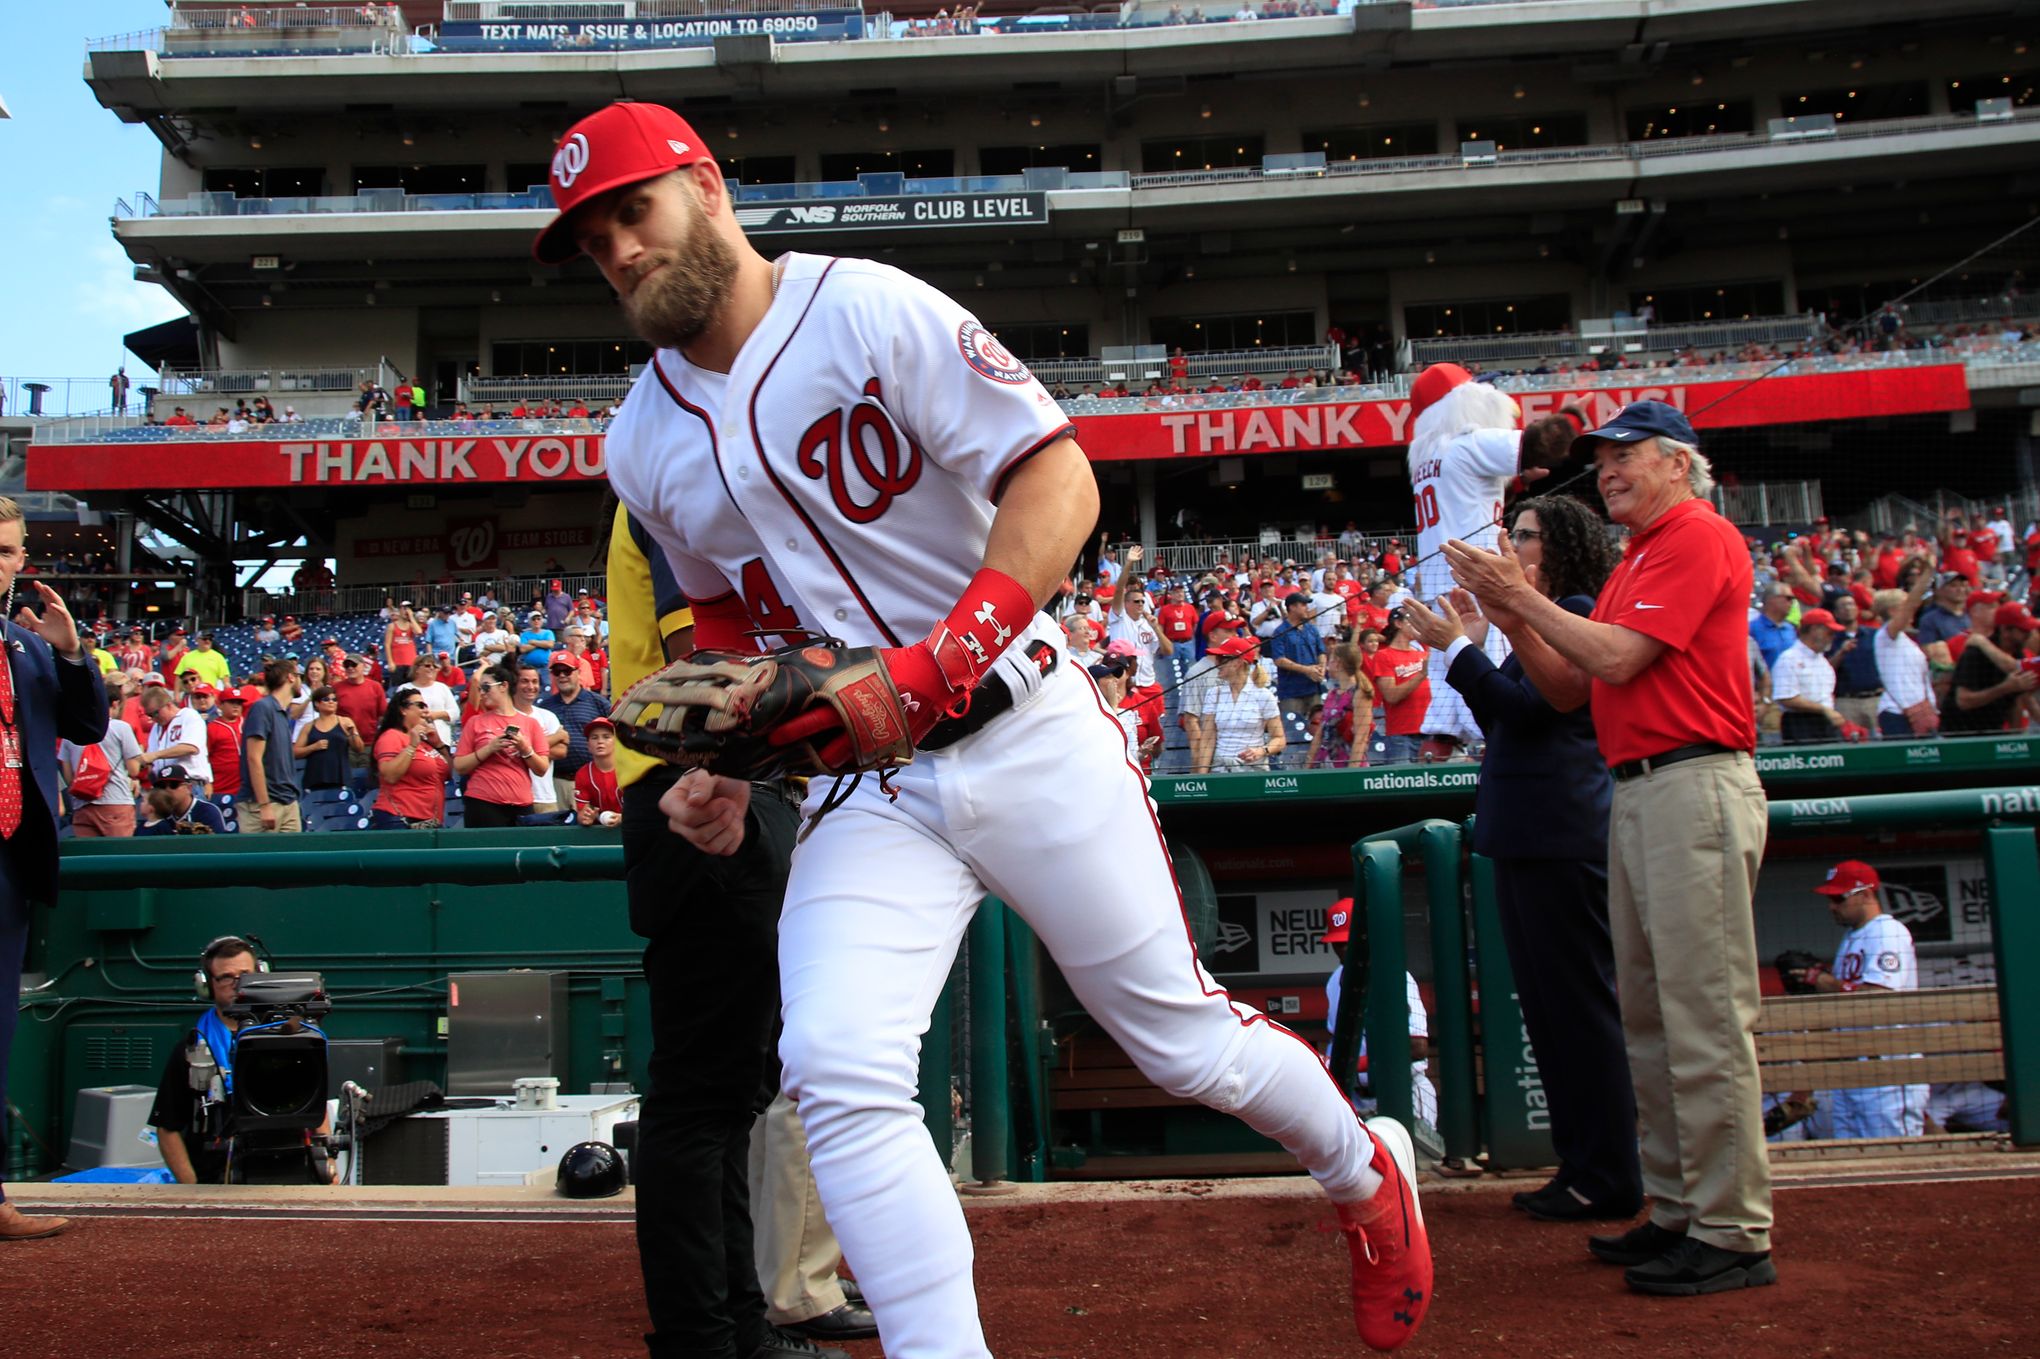 If that was Ryan Zimmerman's final game, Nationals fans gave him the  sendoff he deserved